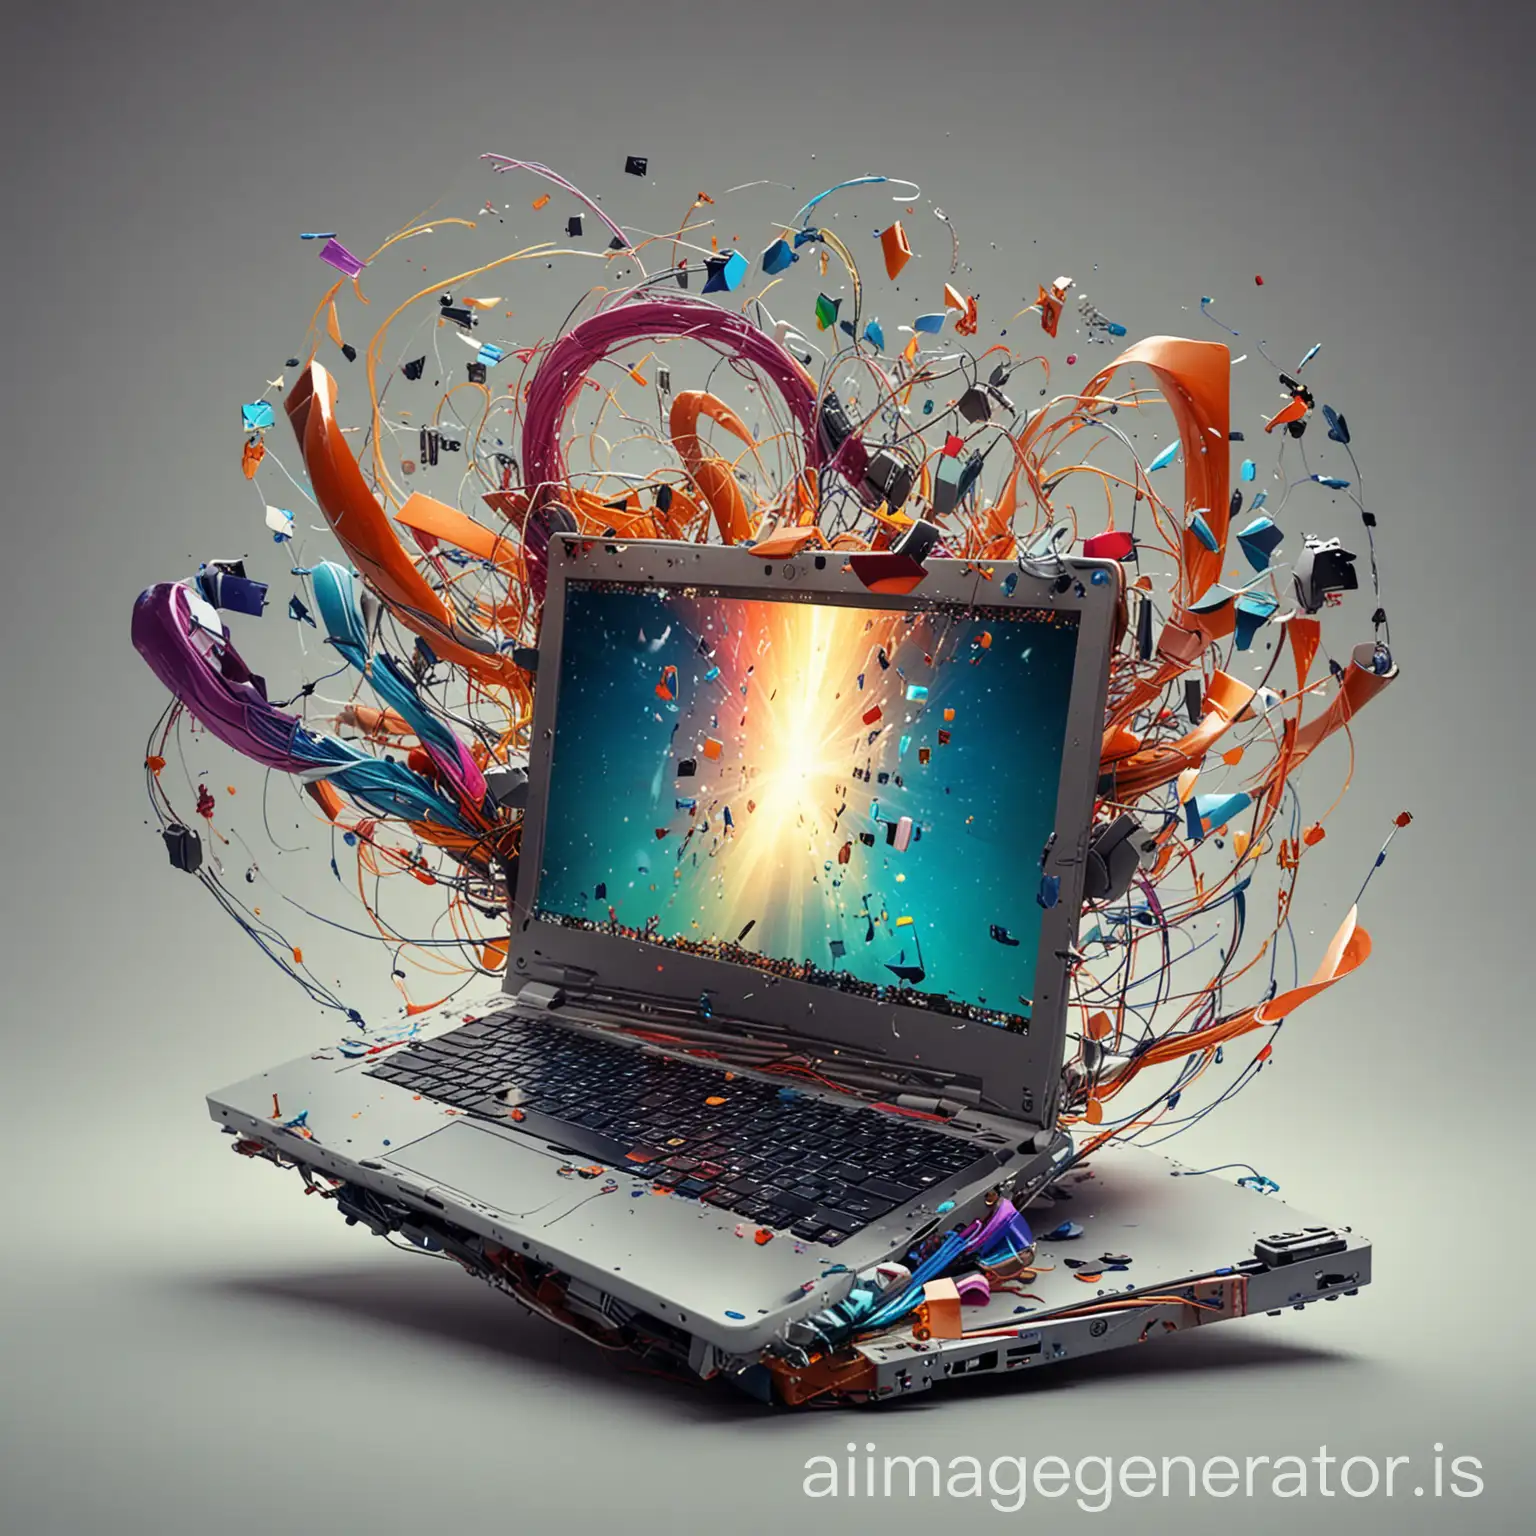 alive laptop, twisting, throwing electronic parts, fantasy, colorful